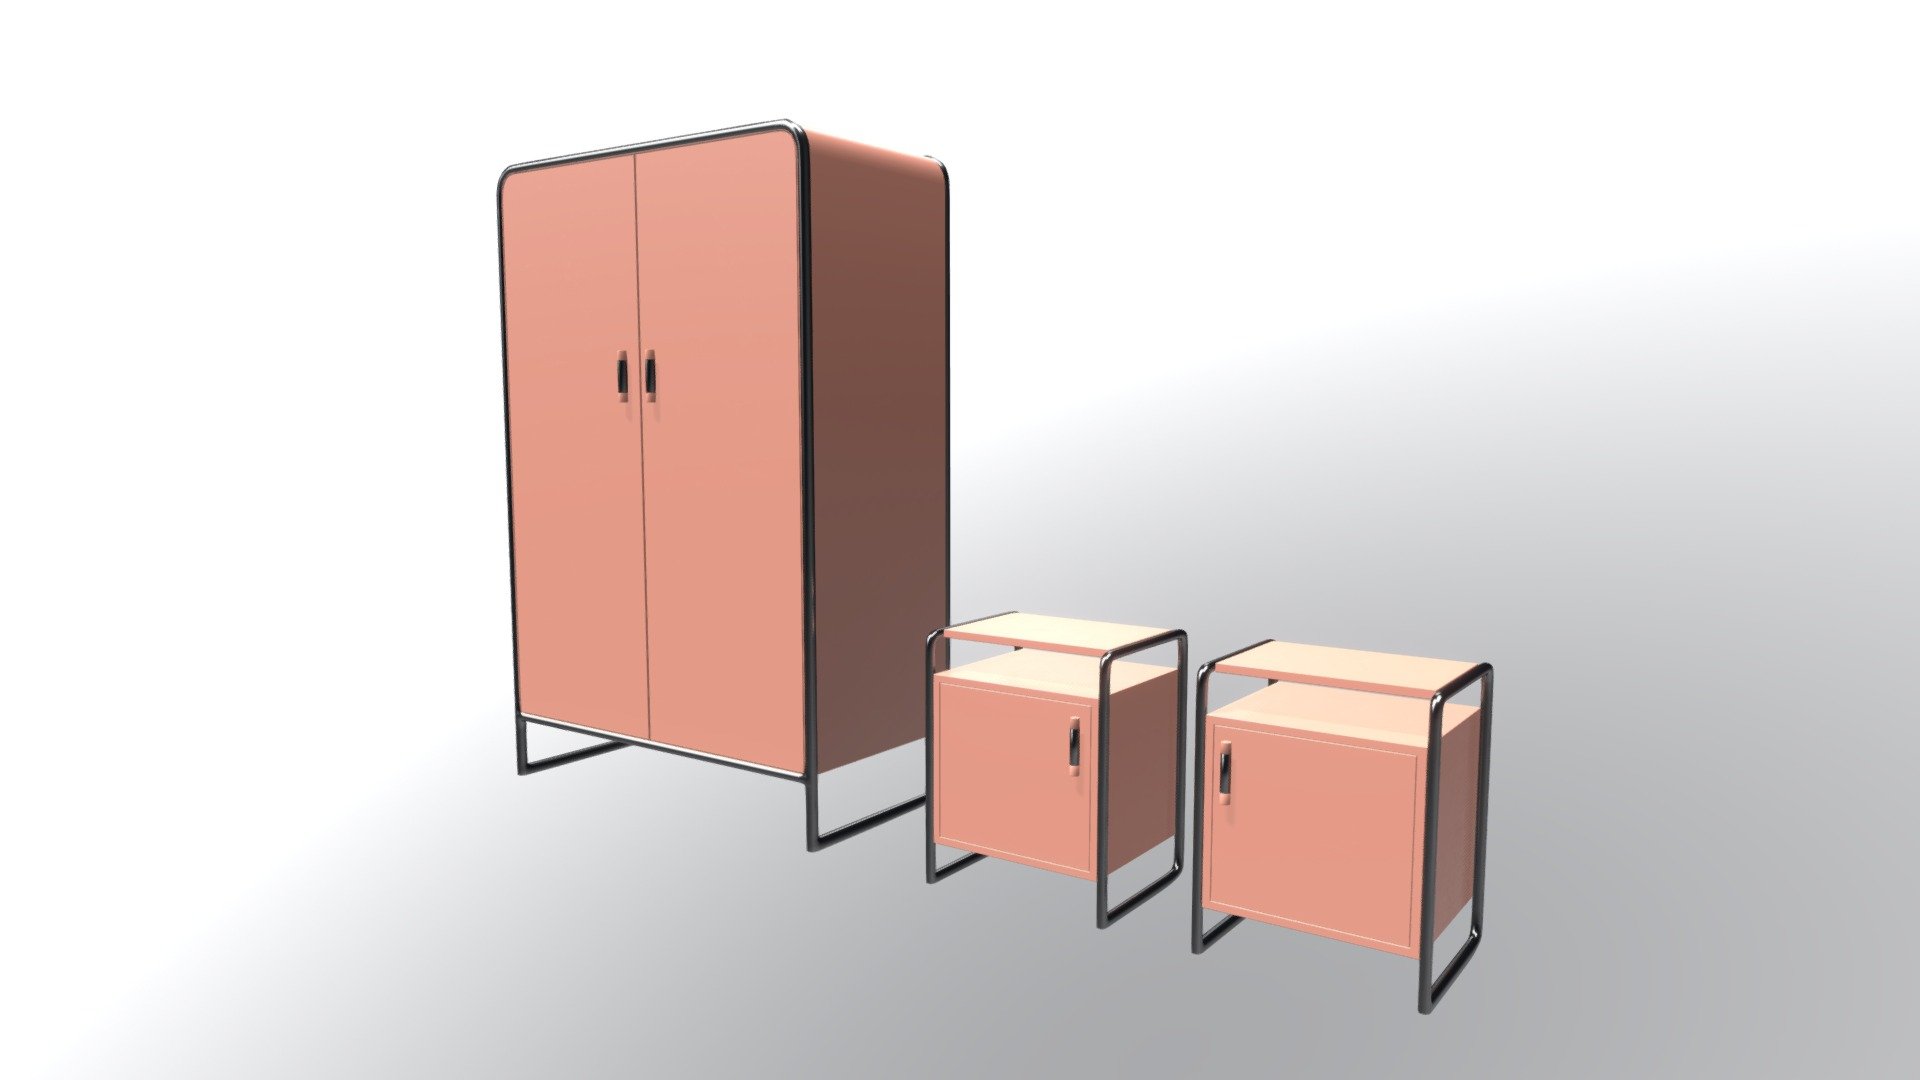 A retro 1960s style bedroom furniture set consisting of a wardrobe and two bedside cabinets (left and right).
This model was created using Blender.
Any questions please feel free to ask 3d model